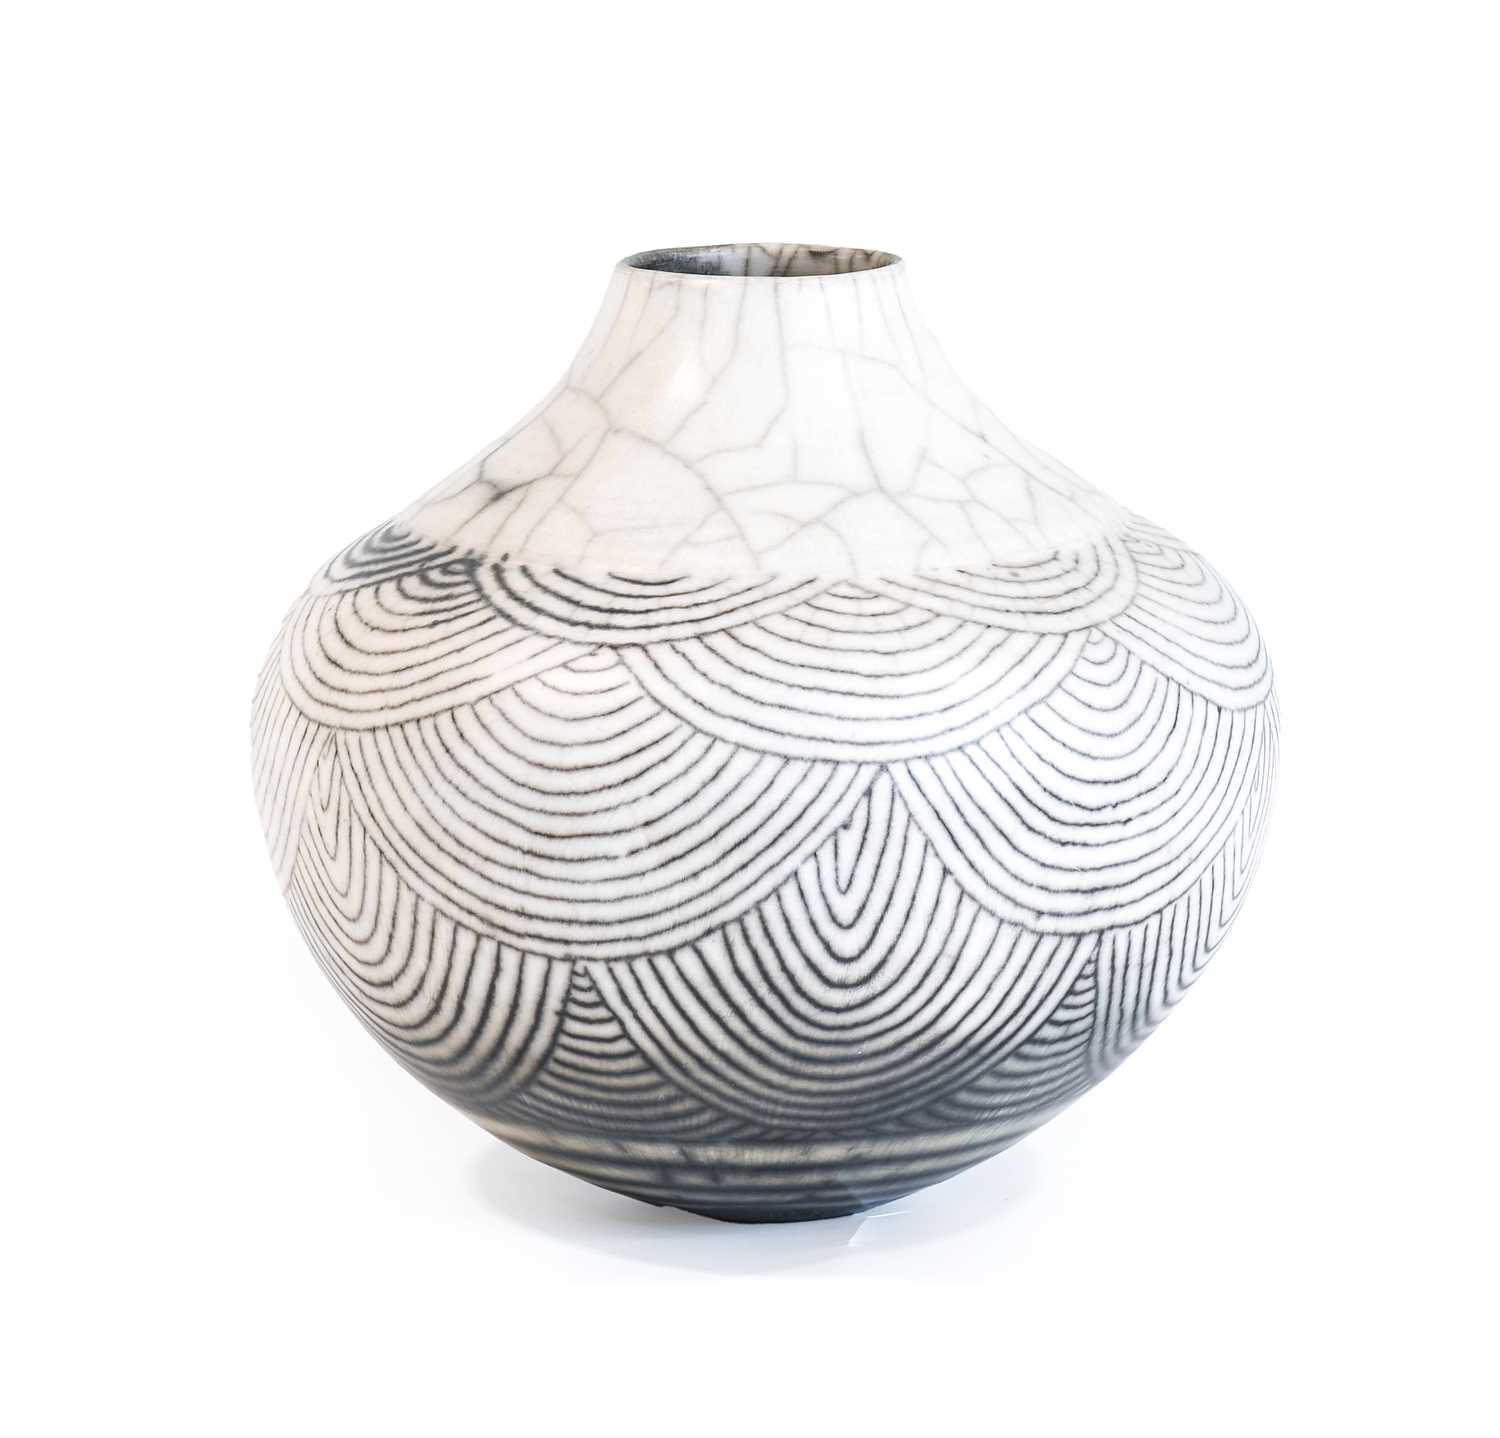 David Roberts (b.1947): A Large Raku Ceramic Vessel, covered in a white and grey crackle and